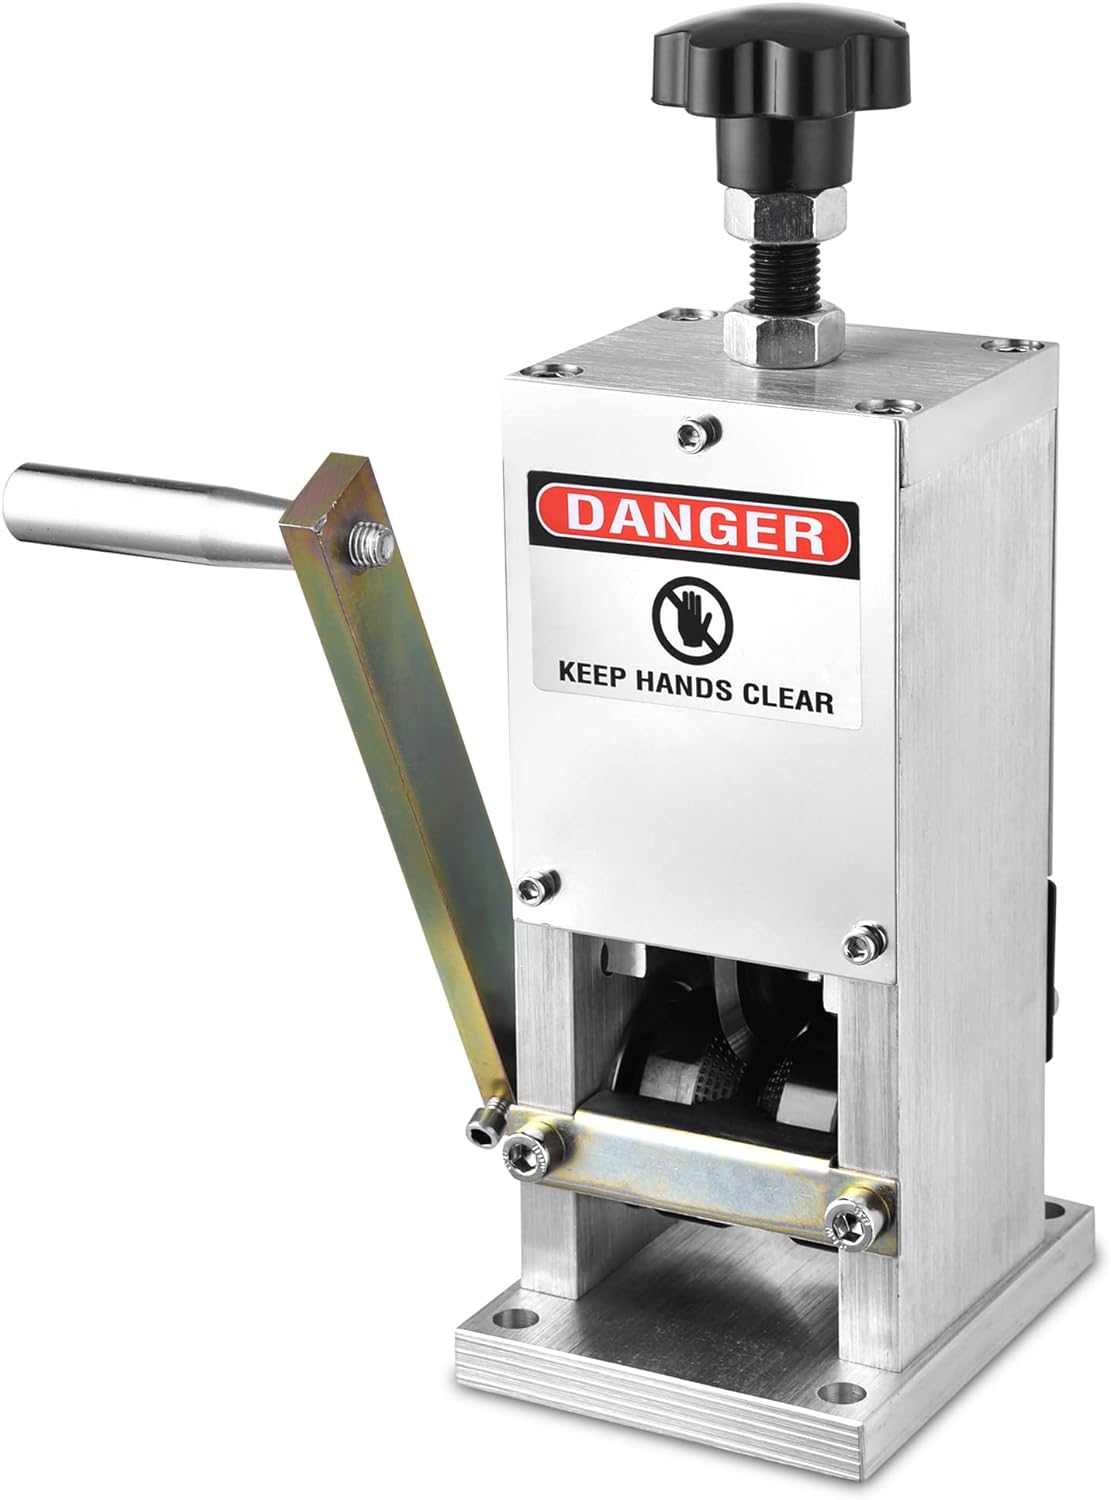 Manual Wire Stripping Machine for 0.06"-1" Copper Wires Recycling - $50